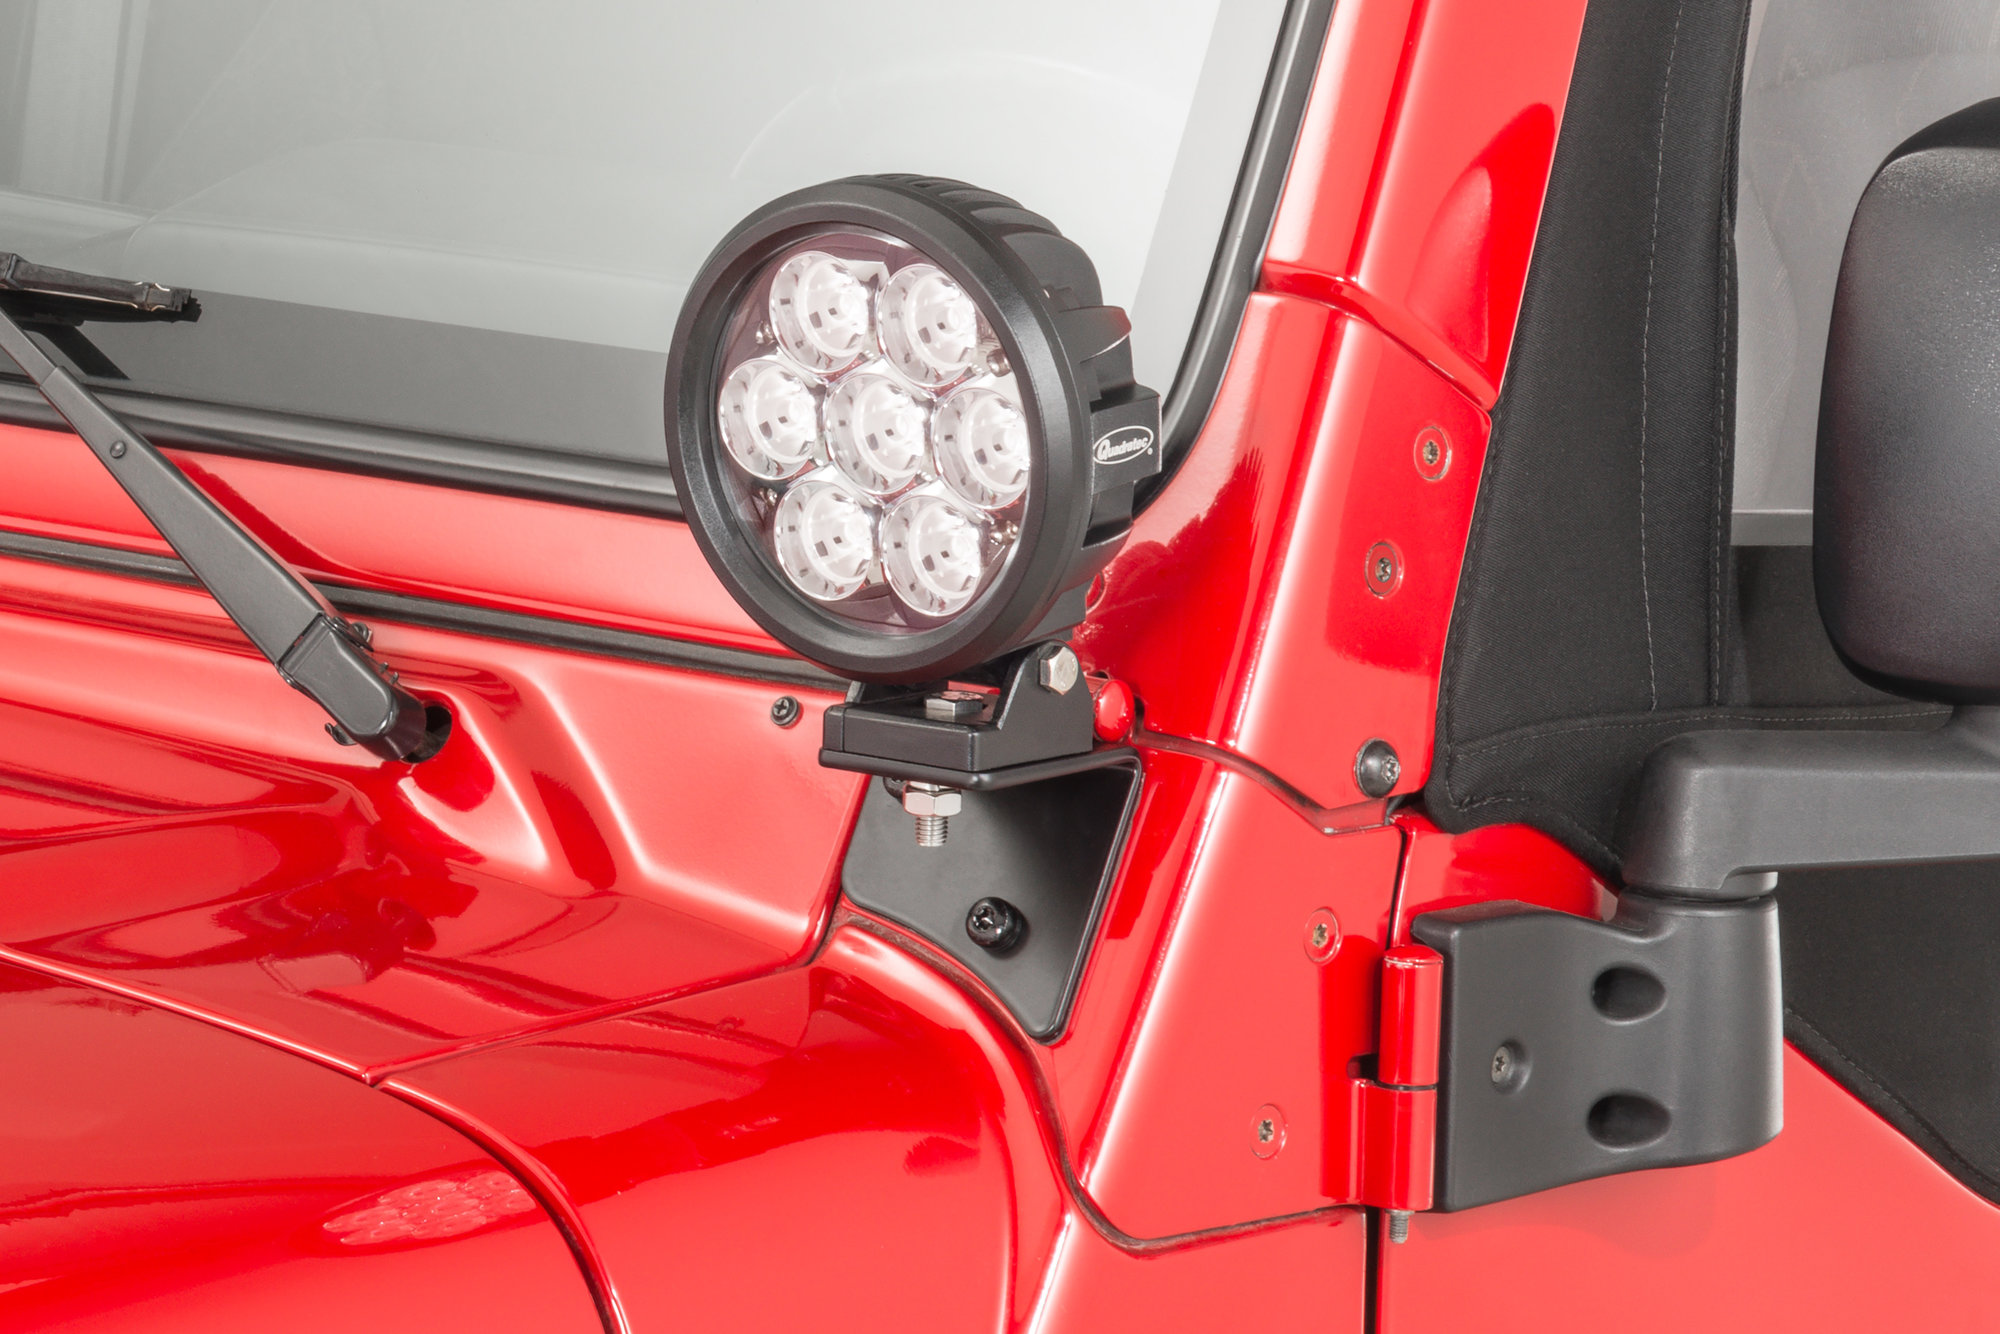 Quadratec 6 Round Led Lights With Wiring Harness Windshield Mount Brackets For 97 06 Jeep Wrangler Tj Unlimited Quadratec